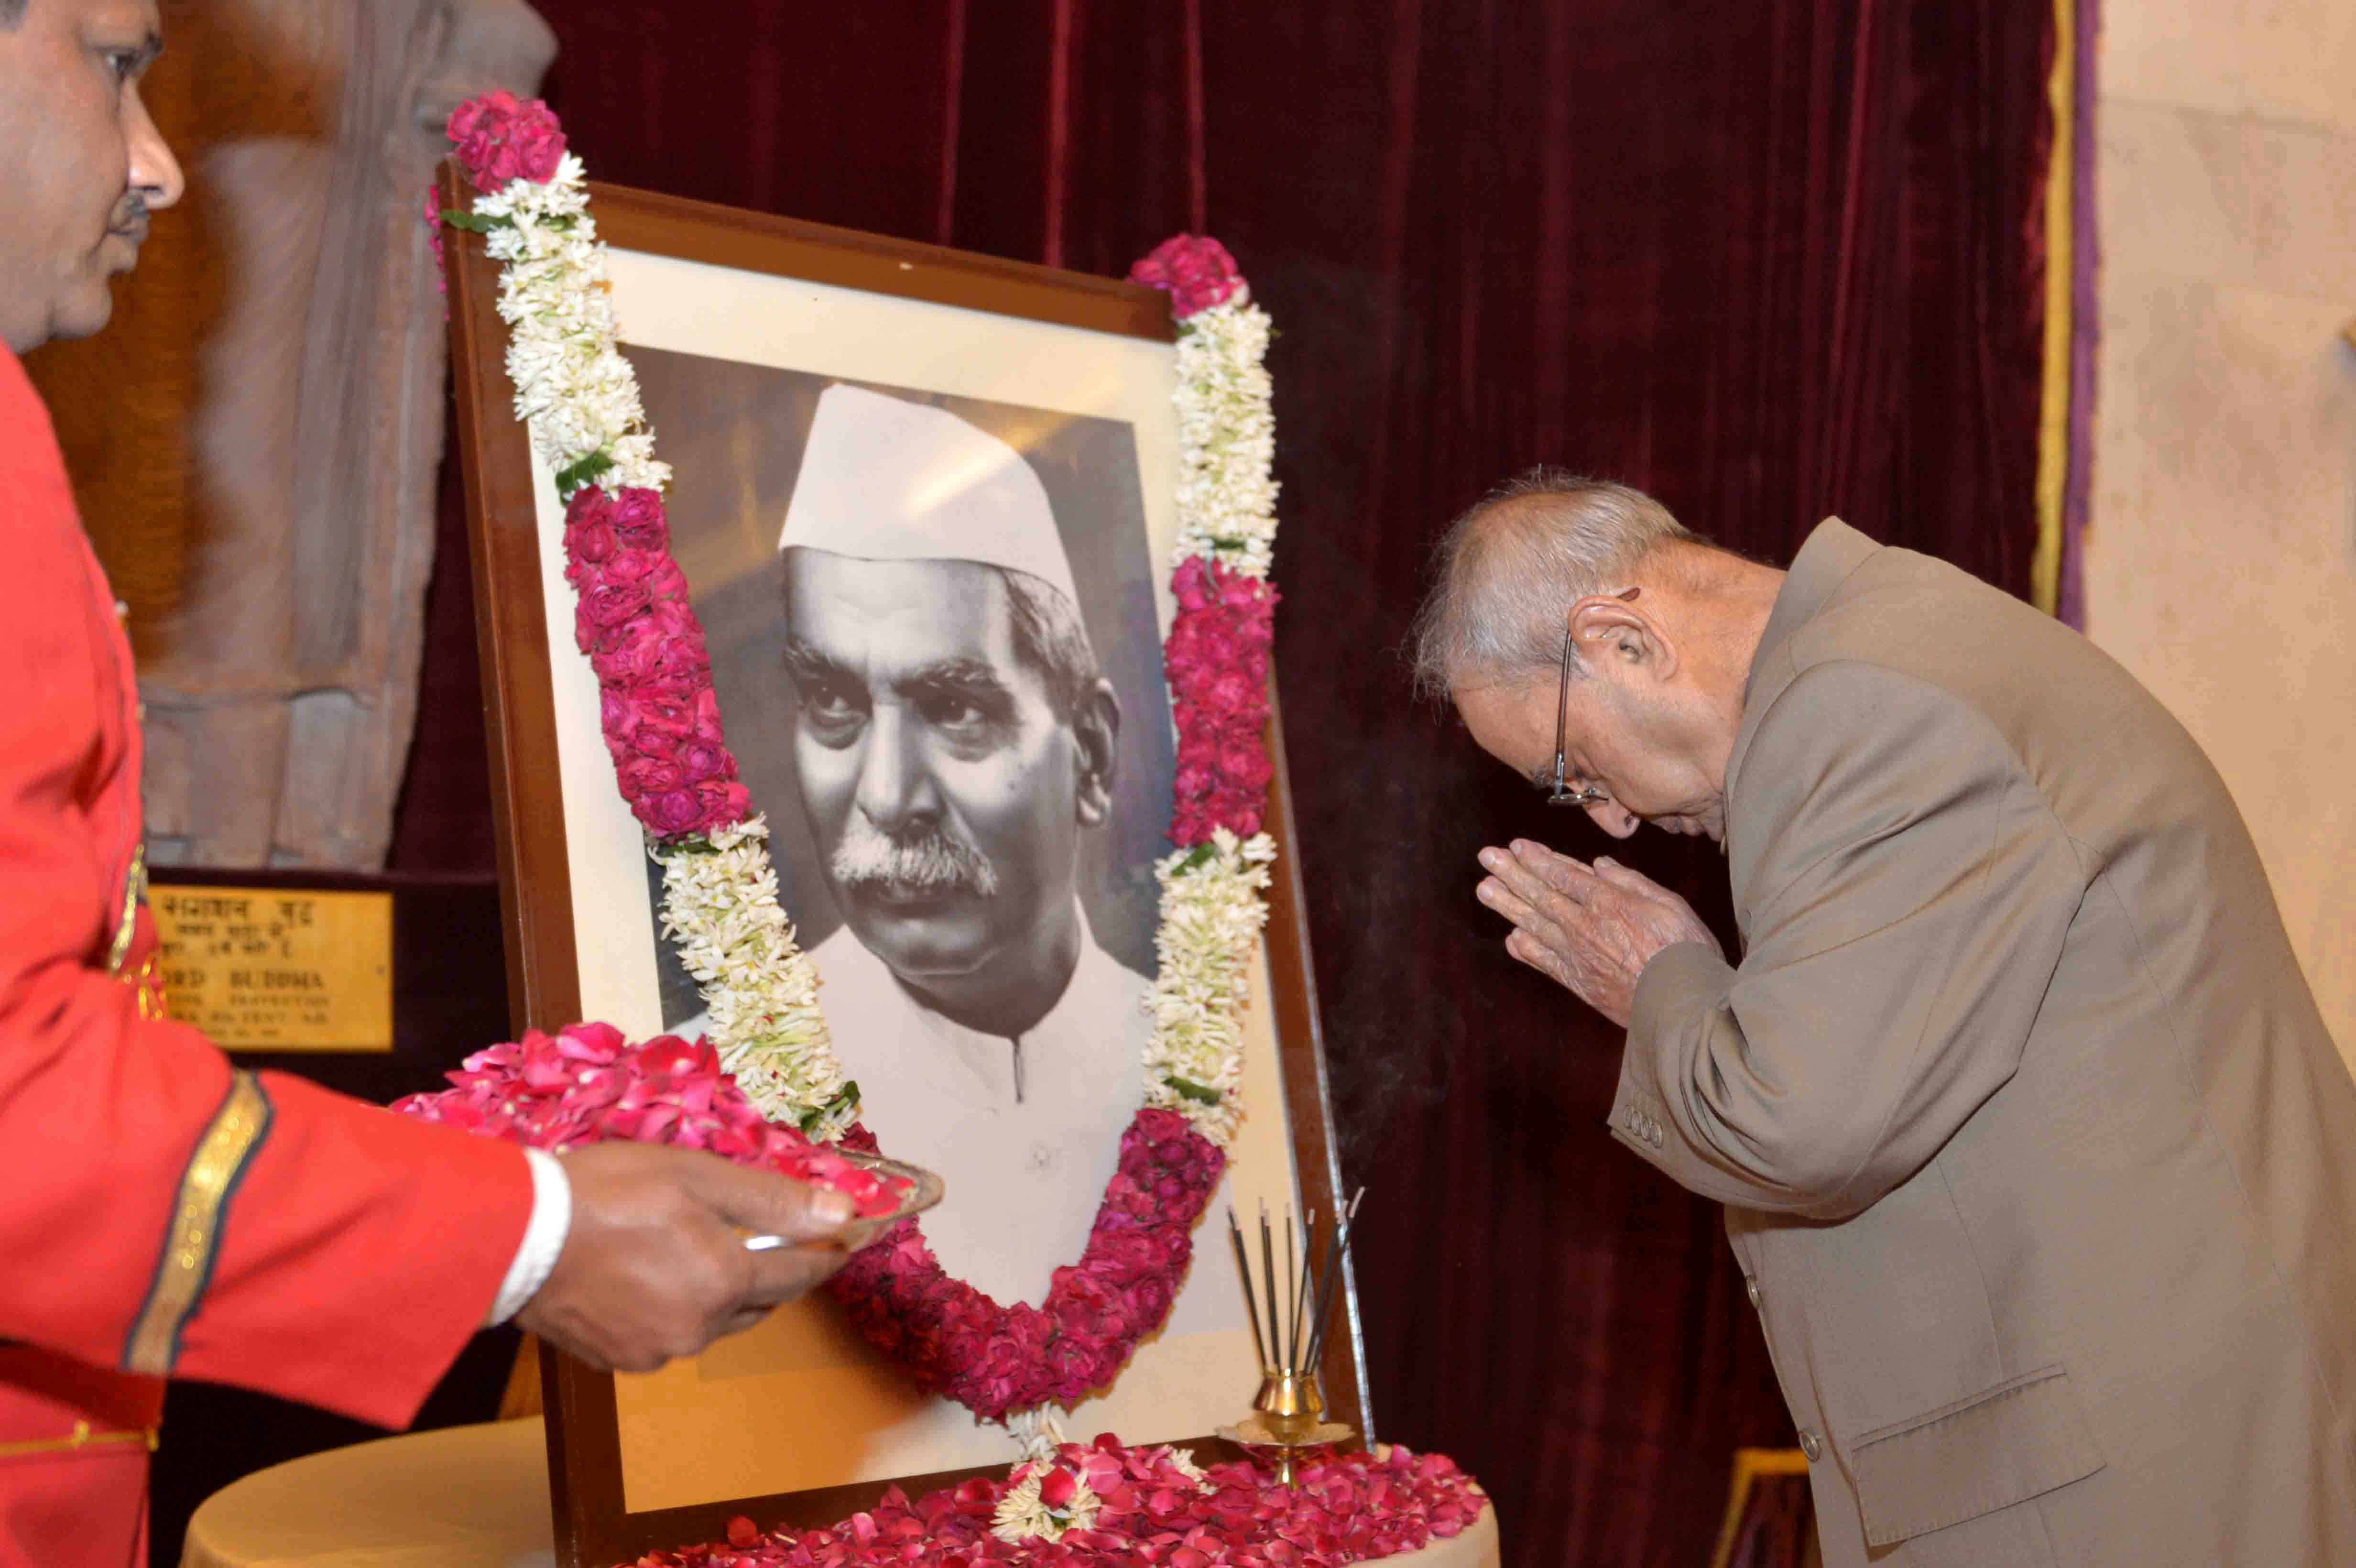 The President of India, Shri Pranab Mukherjee paying floral tributes to Dr. Rajendra Prasad, the First President of India on occasion of his Birth Anniversary at Rashtrapati Bhavan on December 3, 2016.